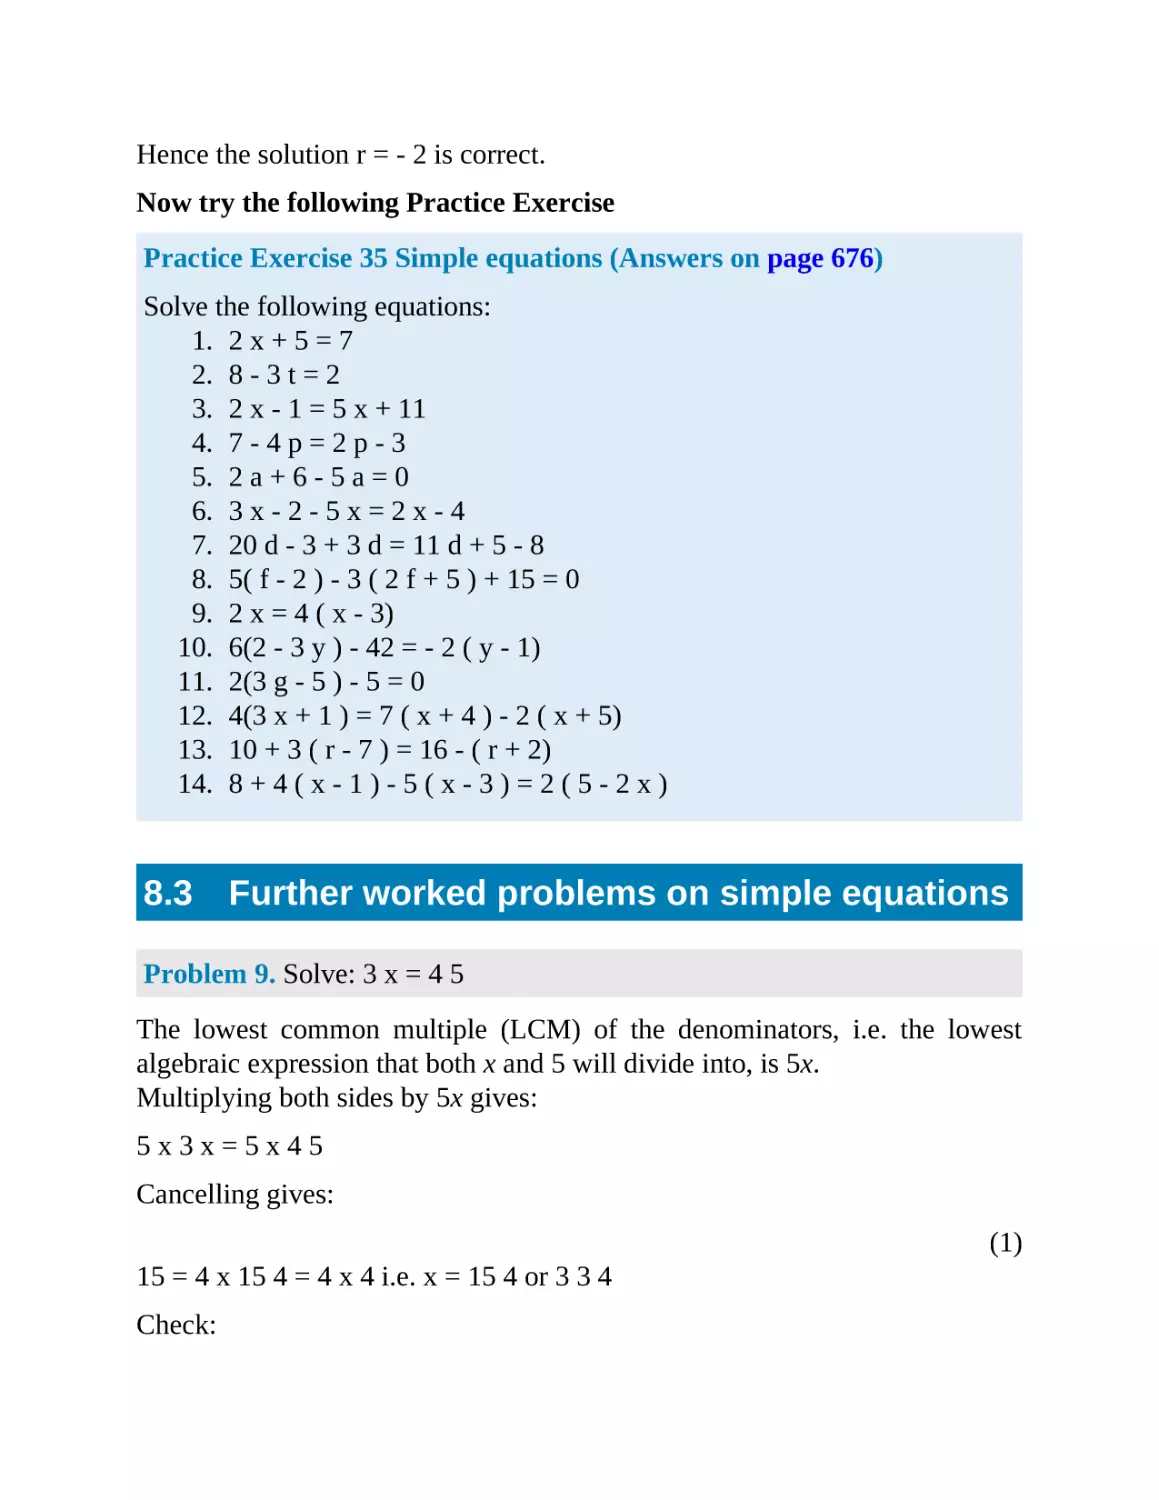 8.3 Further worked problems on simple equations